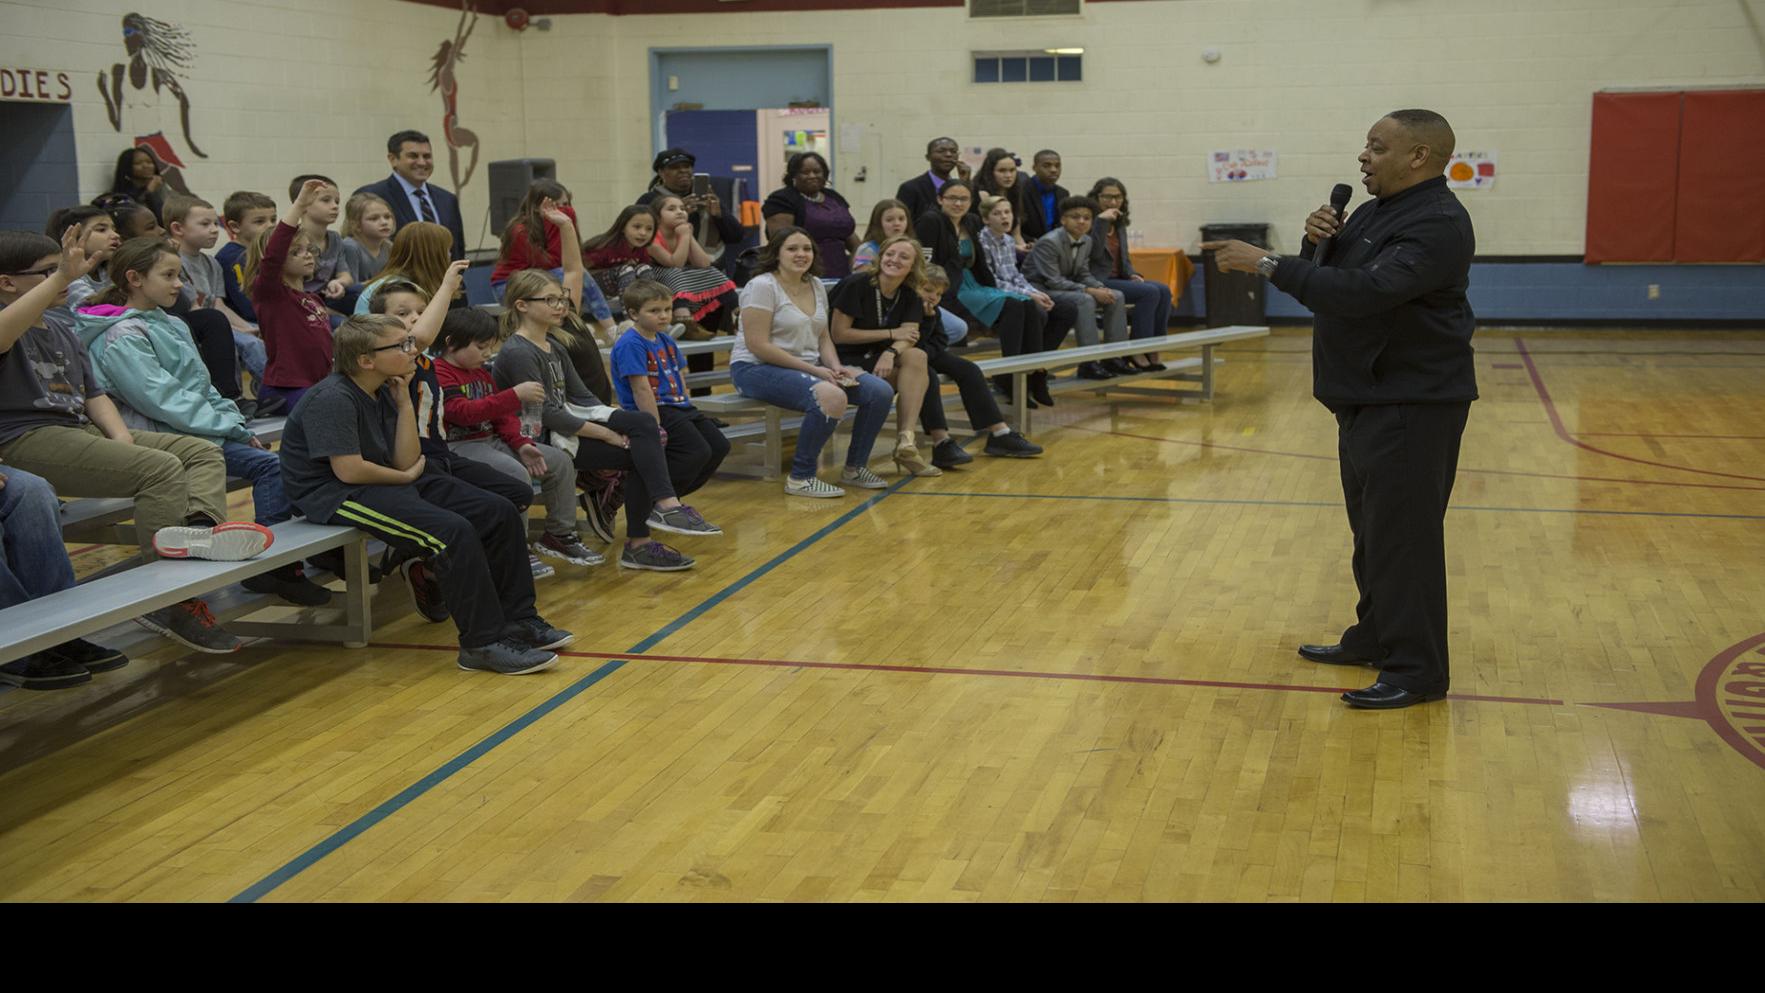 Spud Webb shares his story with Colorado Springs youth